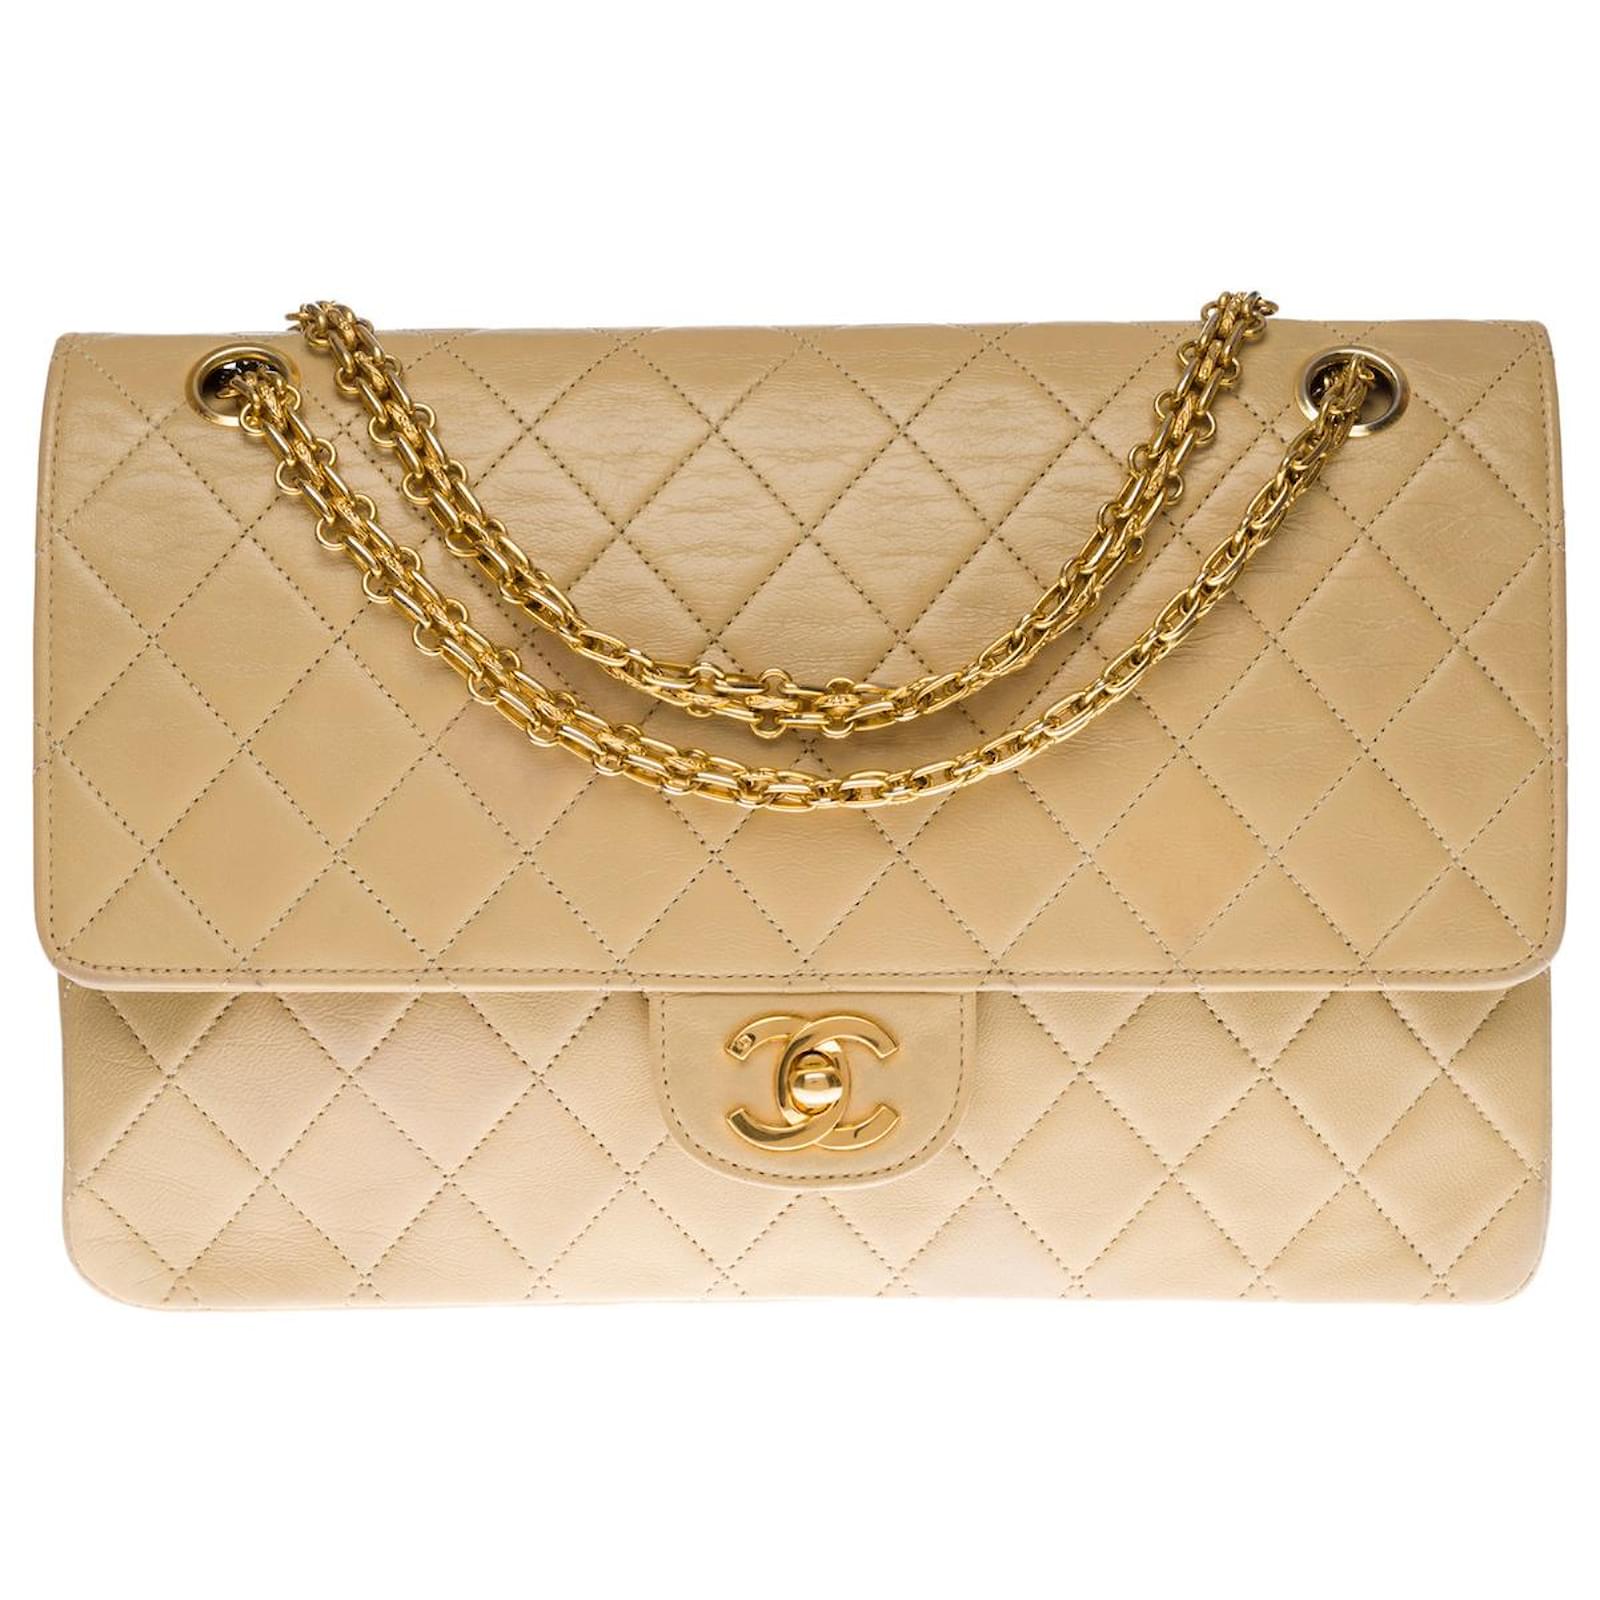 Mademoiselle Chanel Timeless shoulder bag/CLASSIC lined FLAP IN